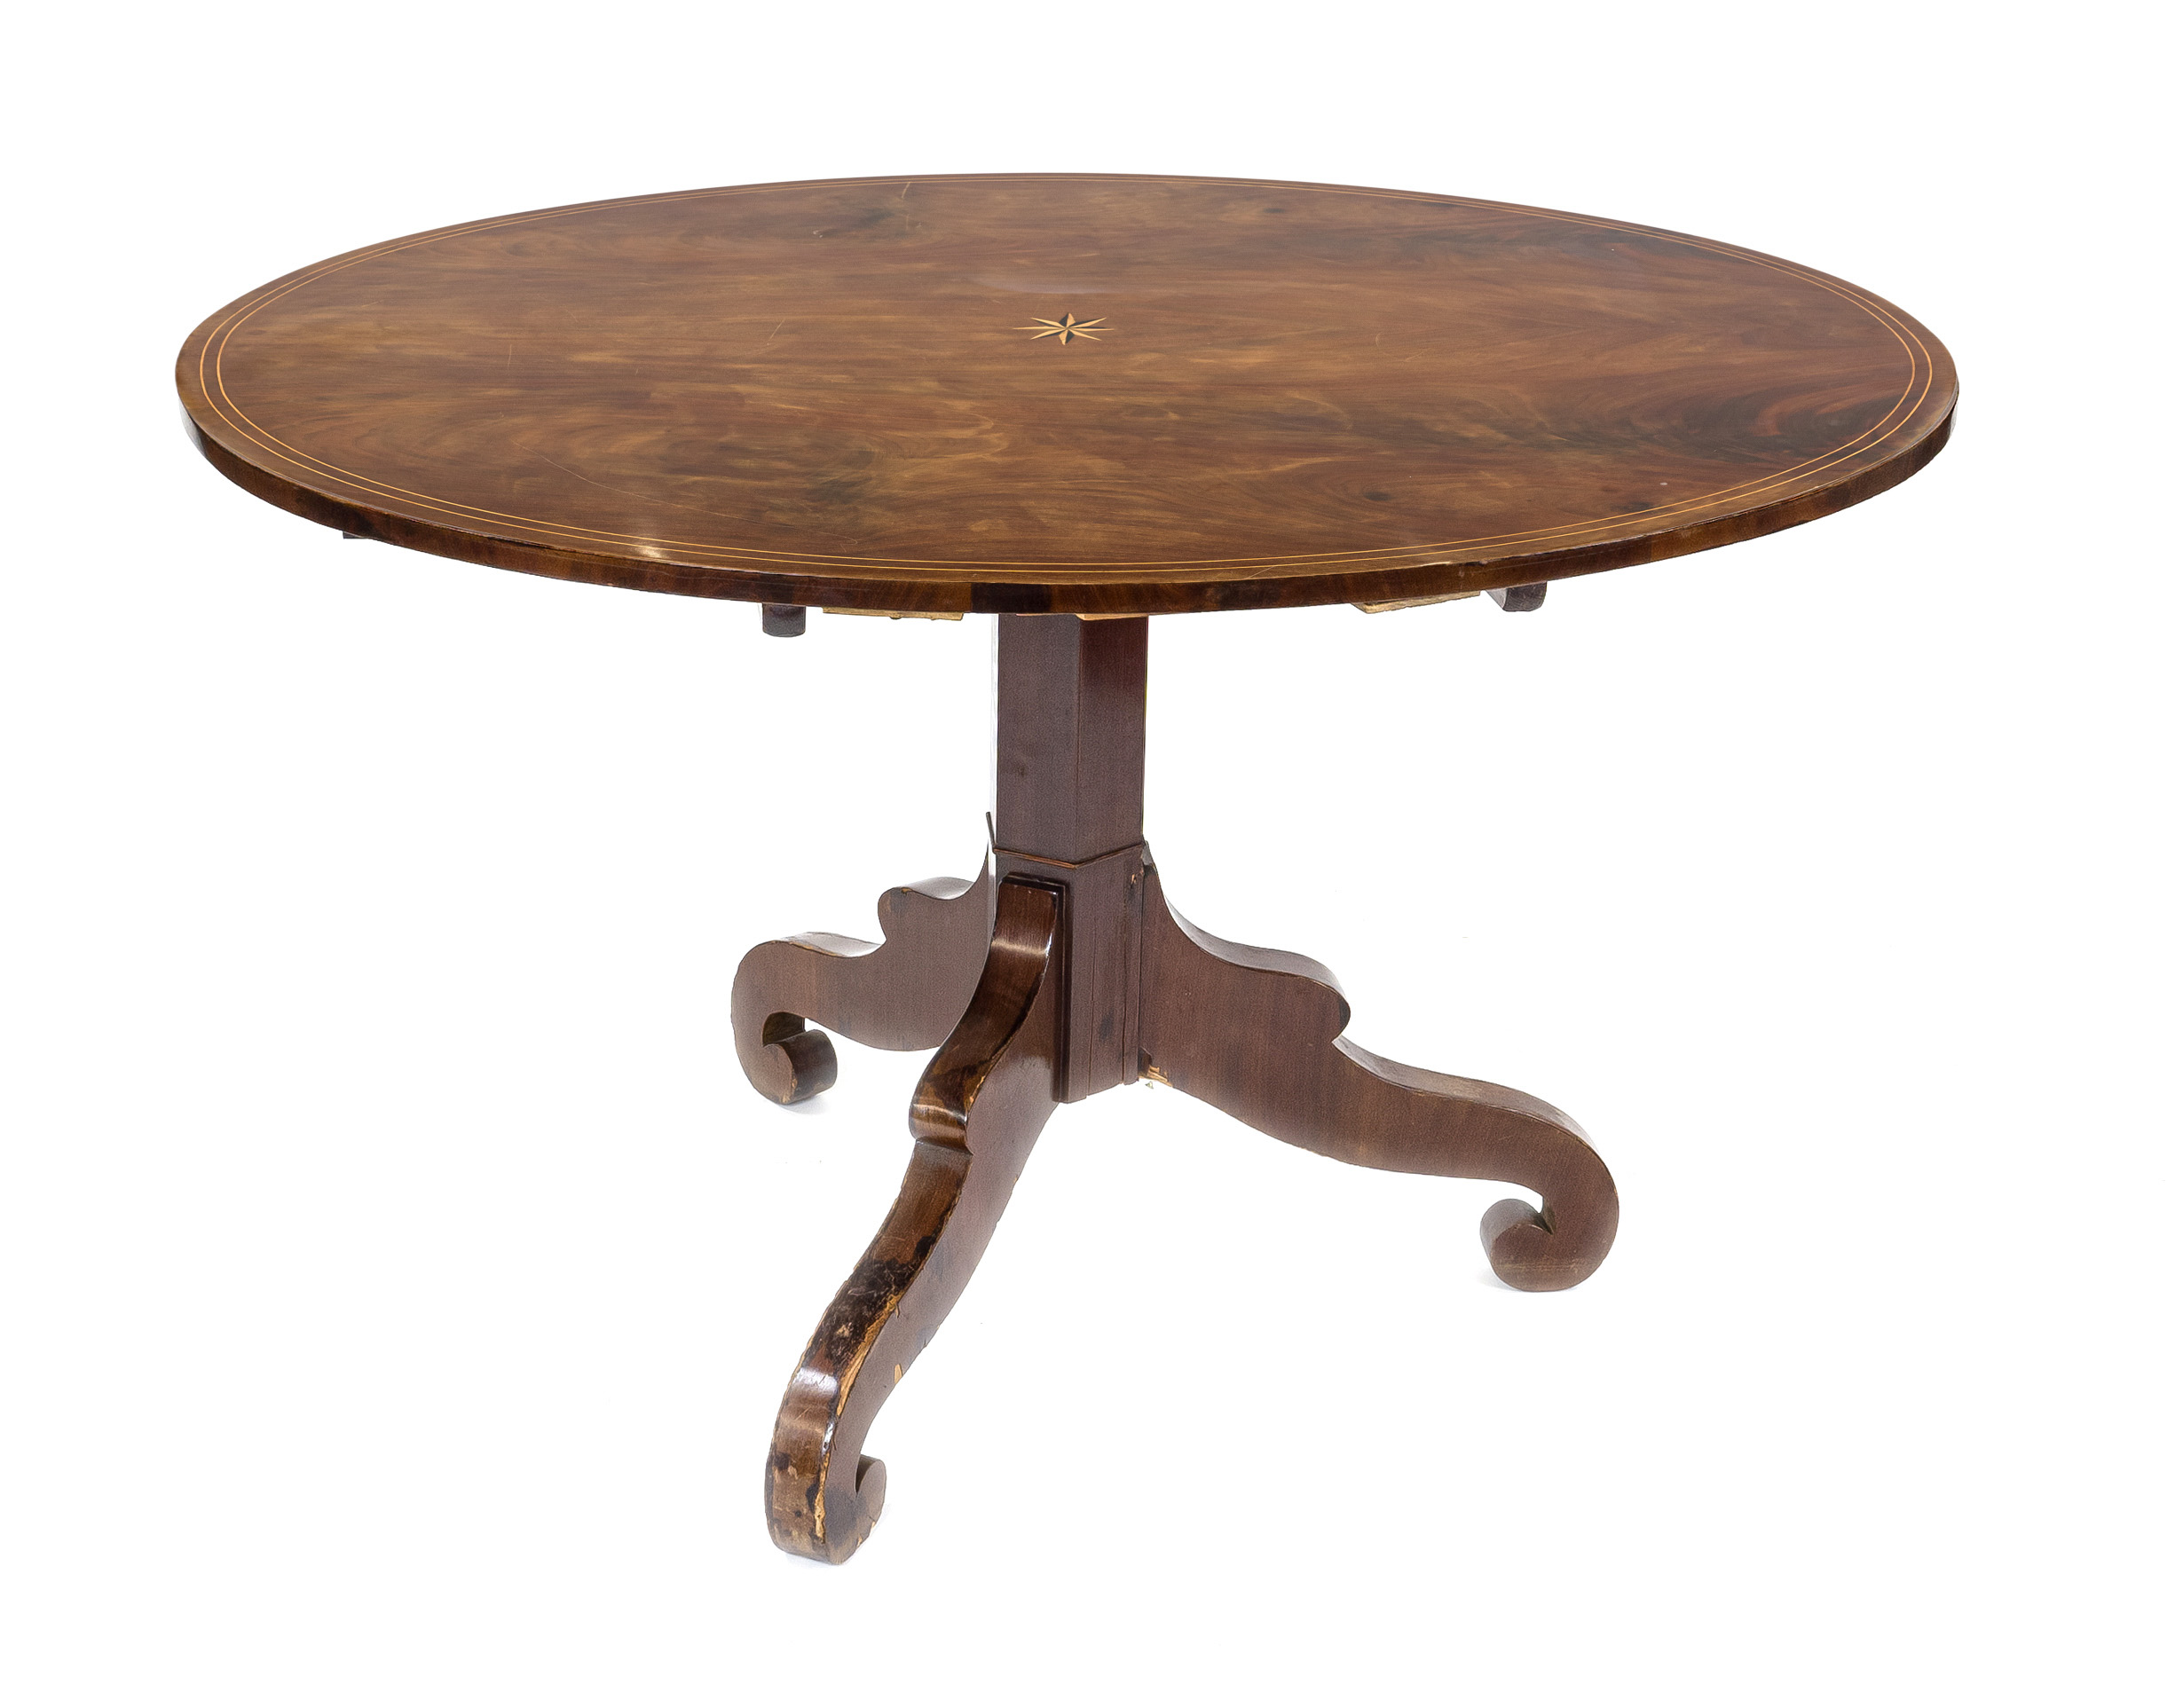 Biedermeier table, early 19th century, mahogany, oval top with double thread inlay and central